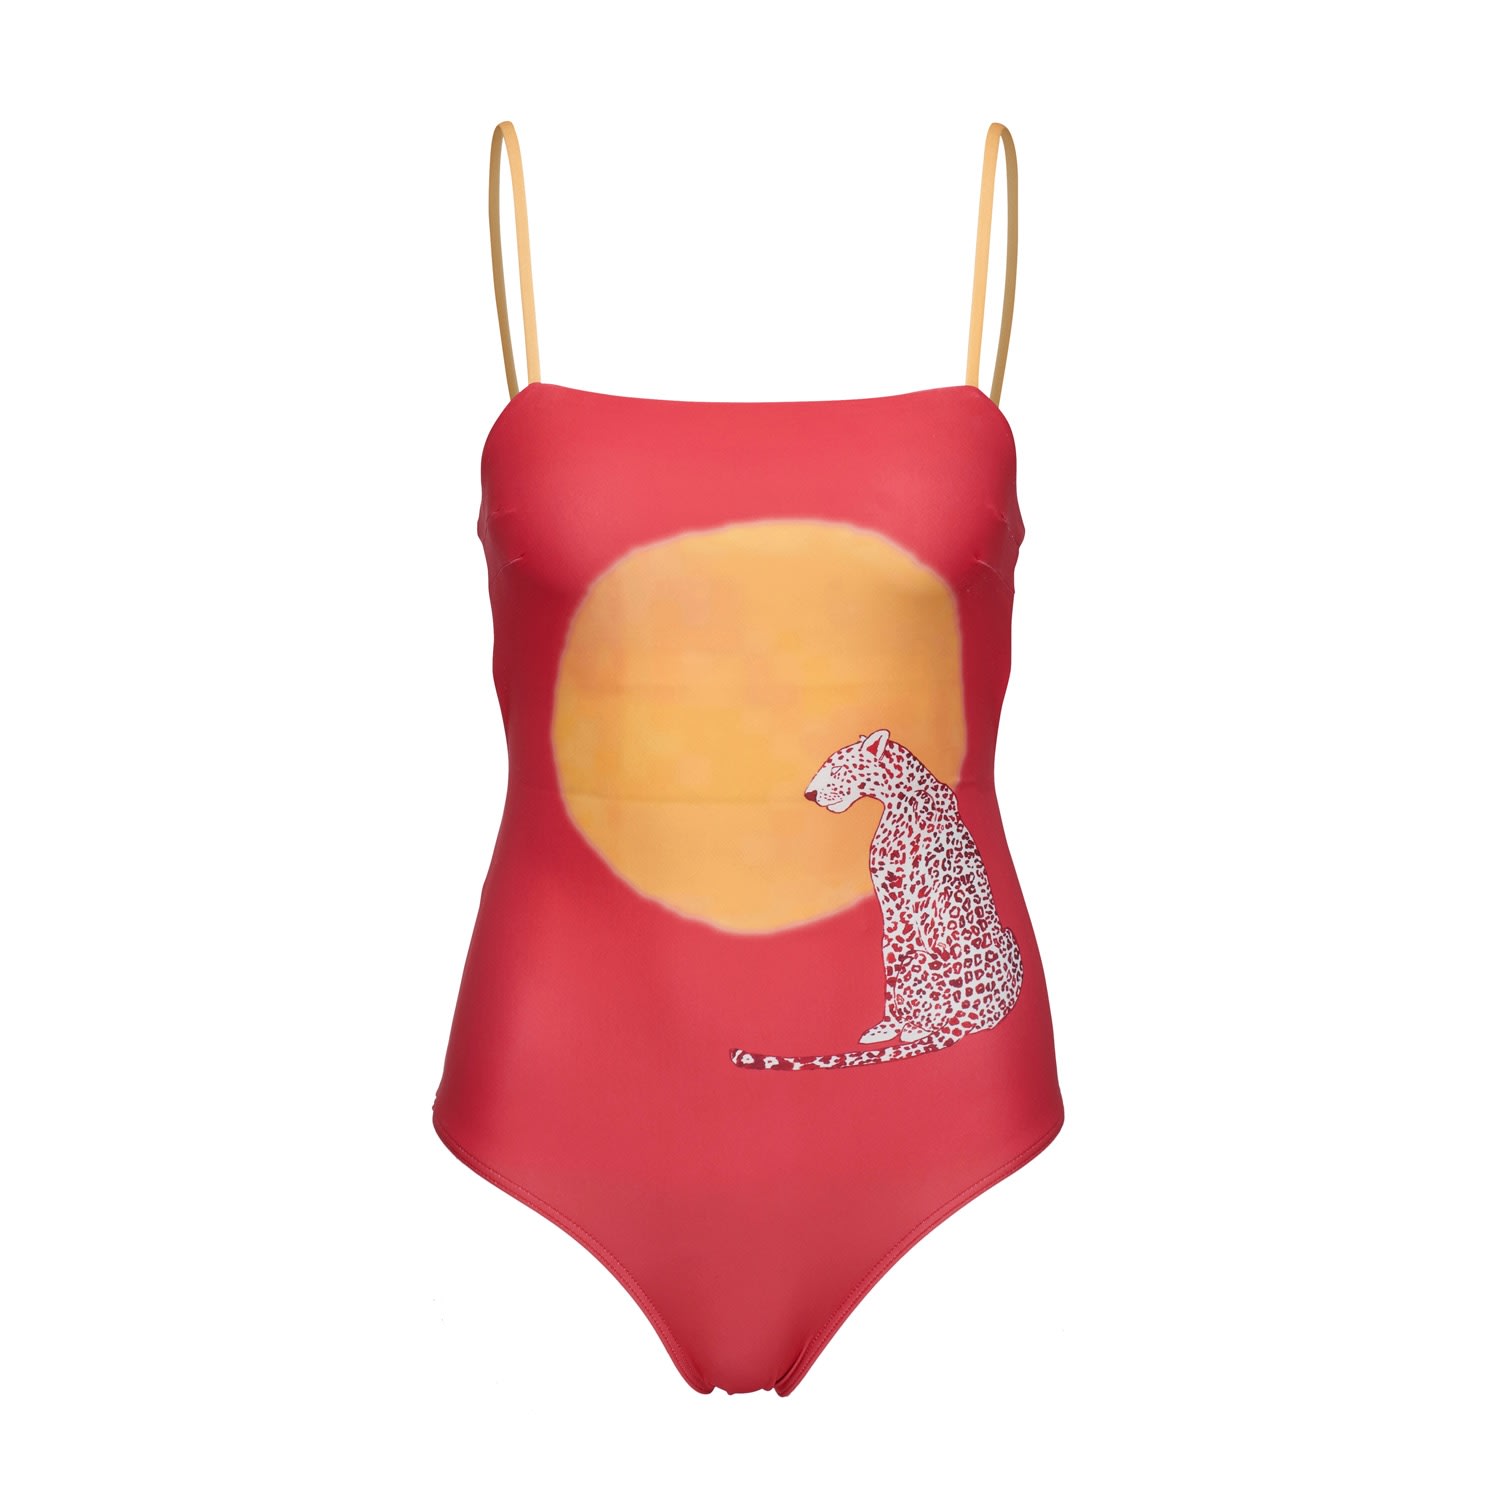 Pelso Women's Mona One Piece Savannah Radiant Red